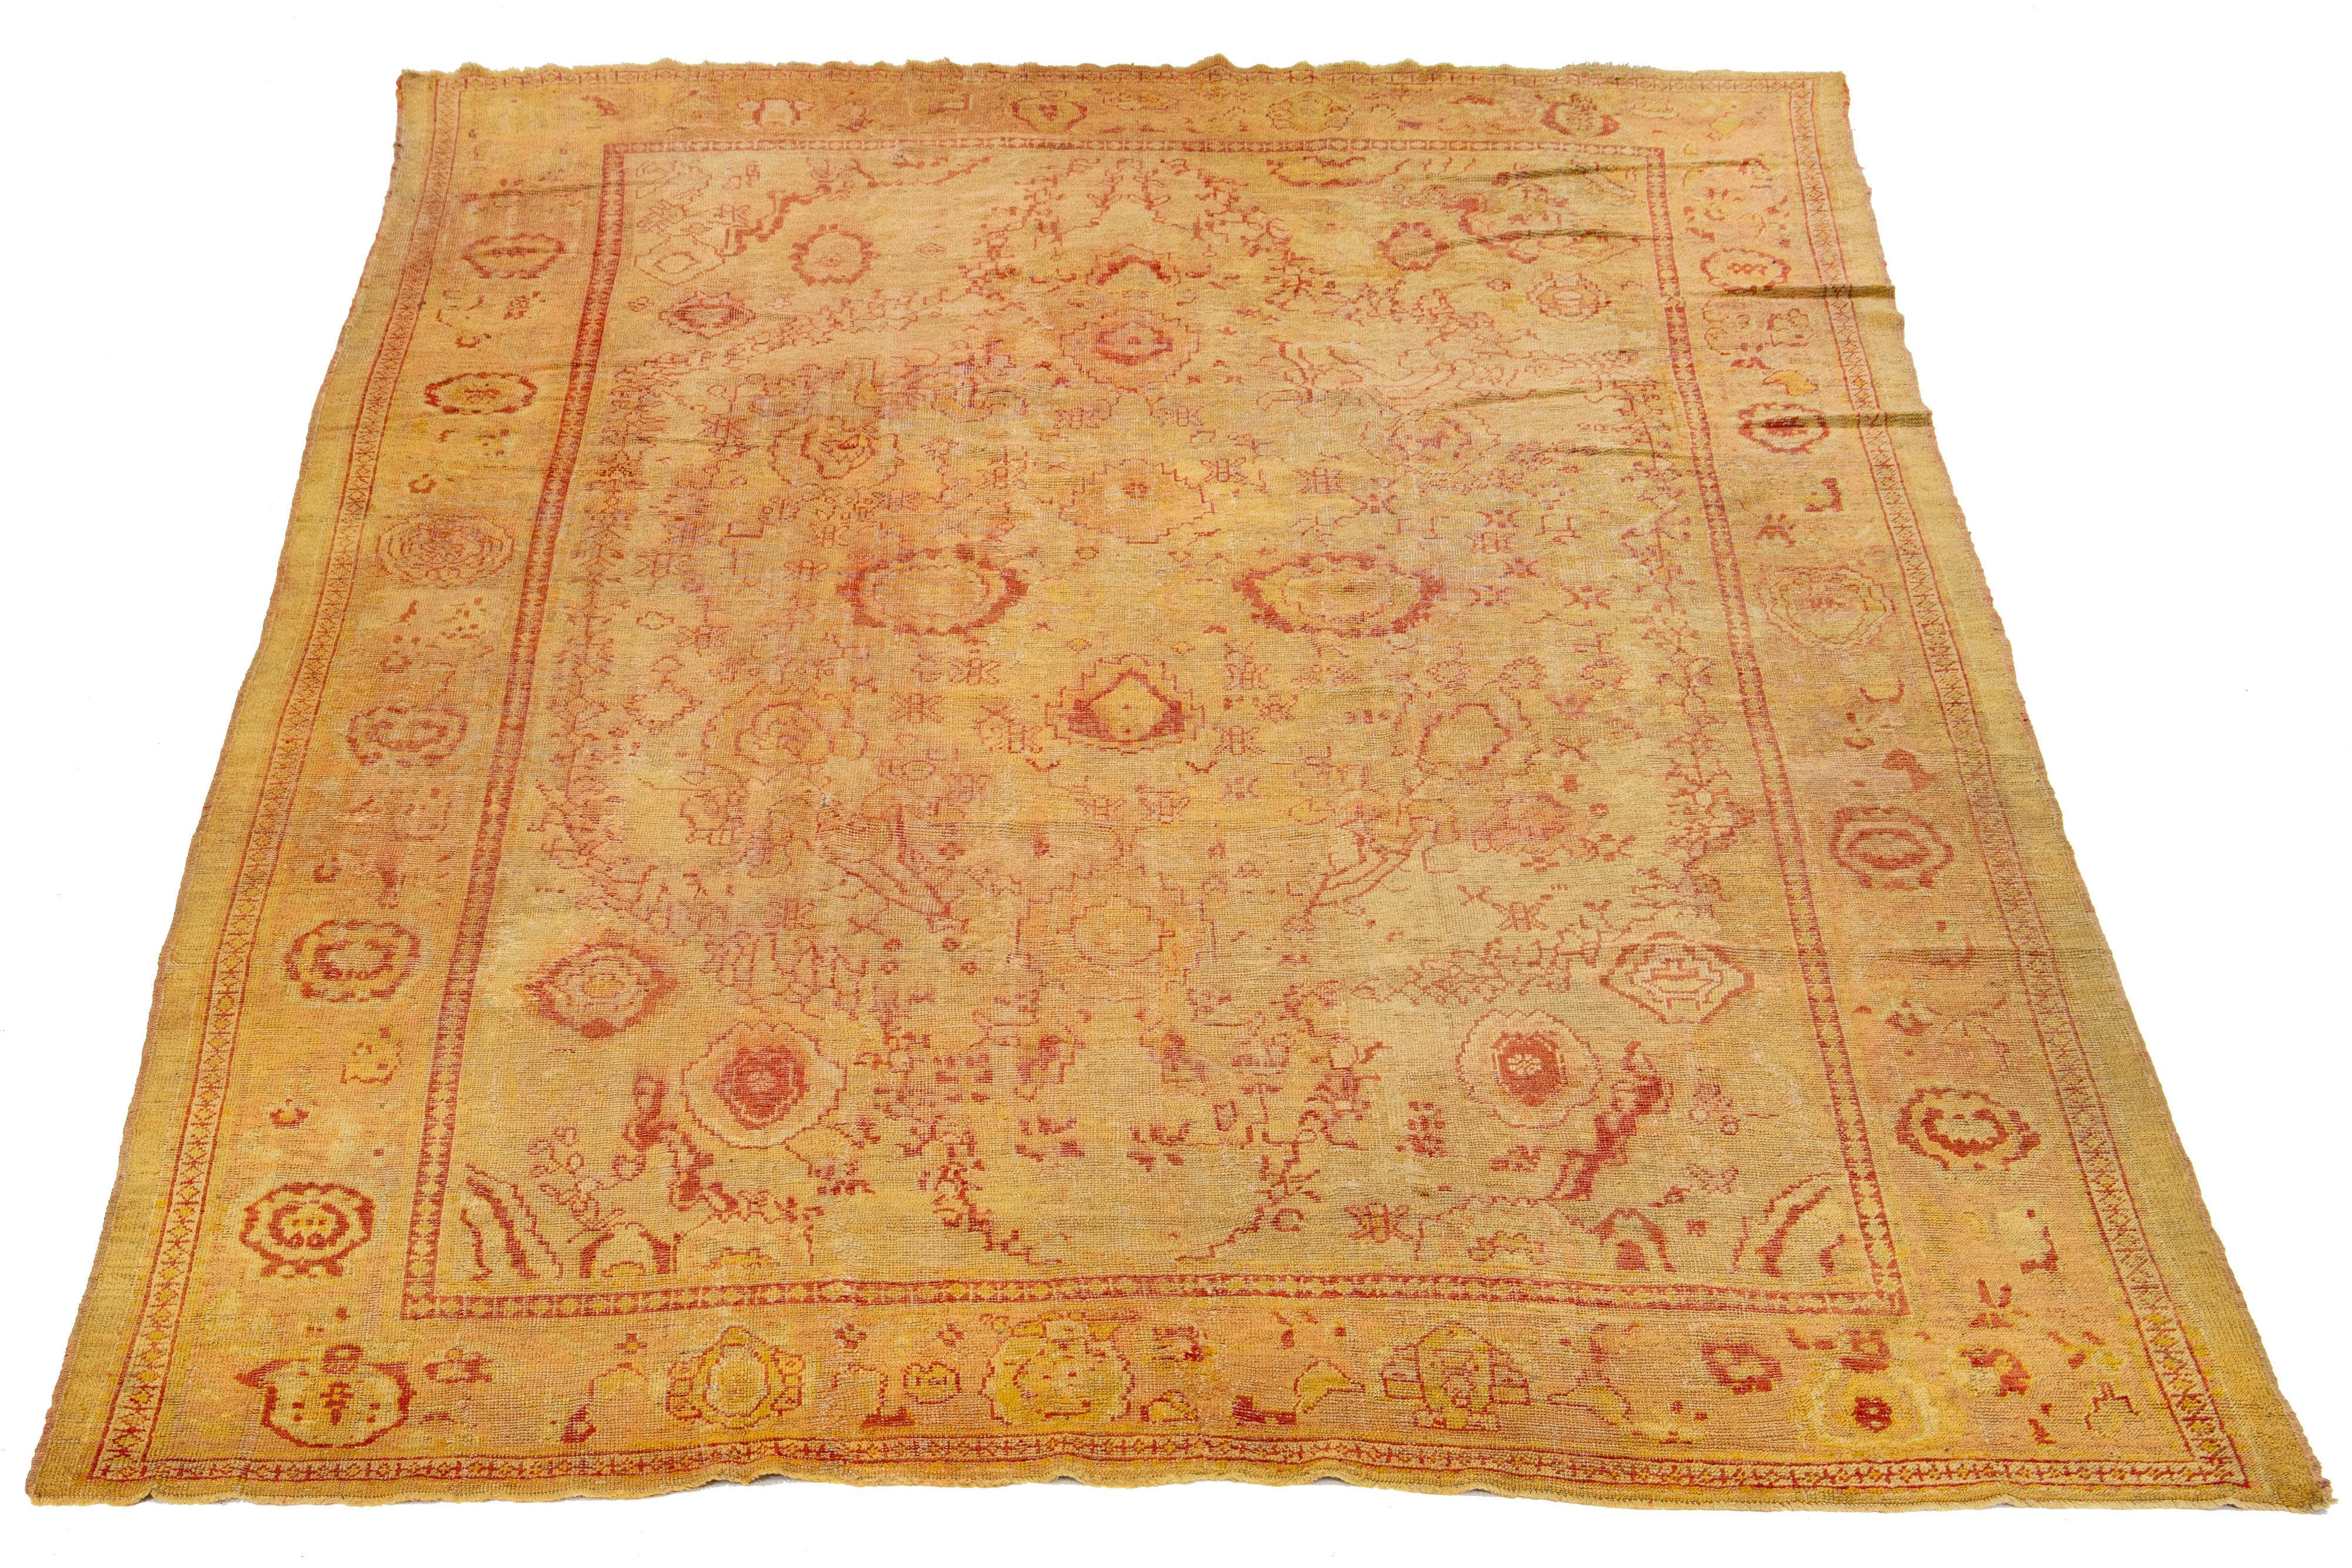 This exceptional antique Turkish wool rug has a charming tan-colored base and is hand-knotted with meticulous attention to detail. It showcases stunning yellow-golden and red accents, displaying a captivating floral pattern.

This rug measures 11' x